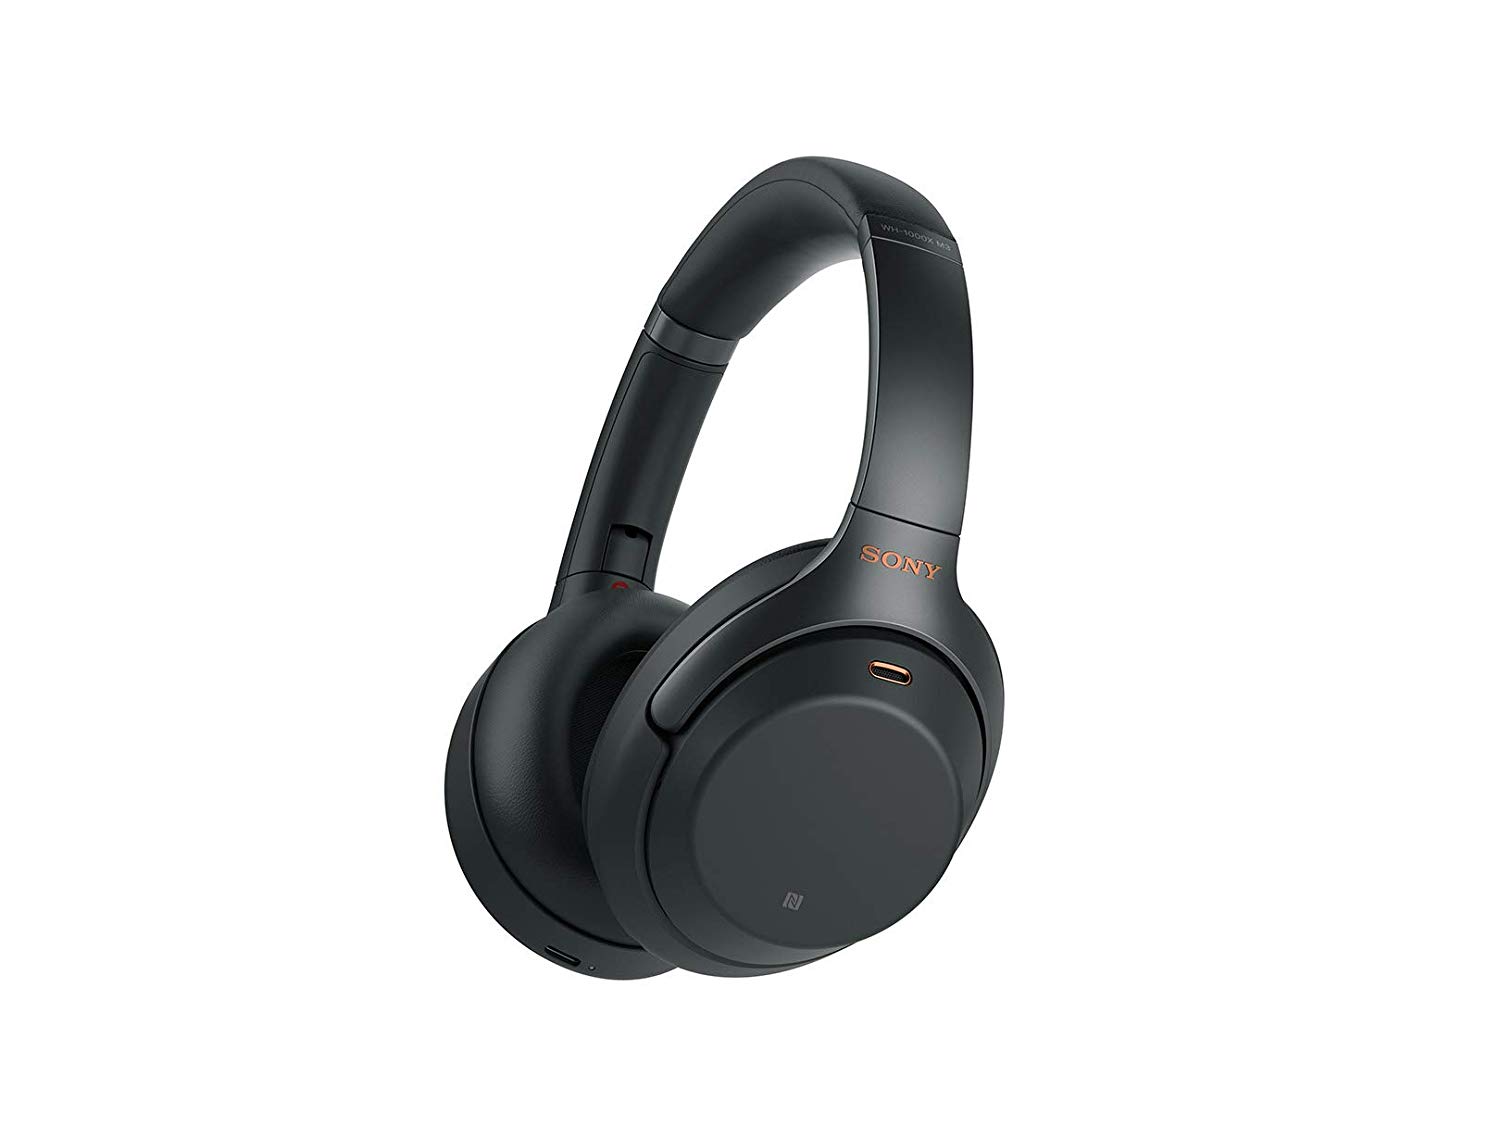 Sony WH-1000XM3 Bluetooth Wireless Over-Ear Headphones with Mic and NFC - Noise-Canceling